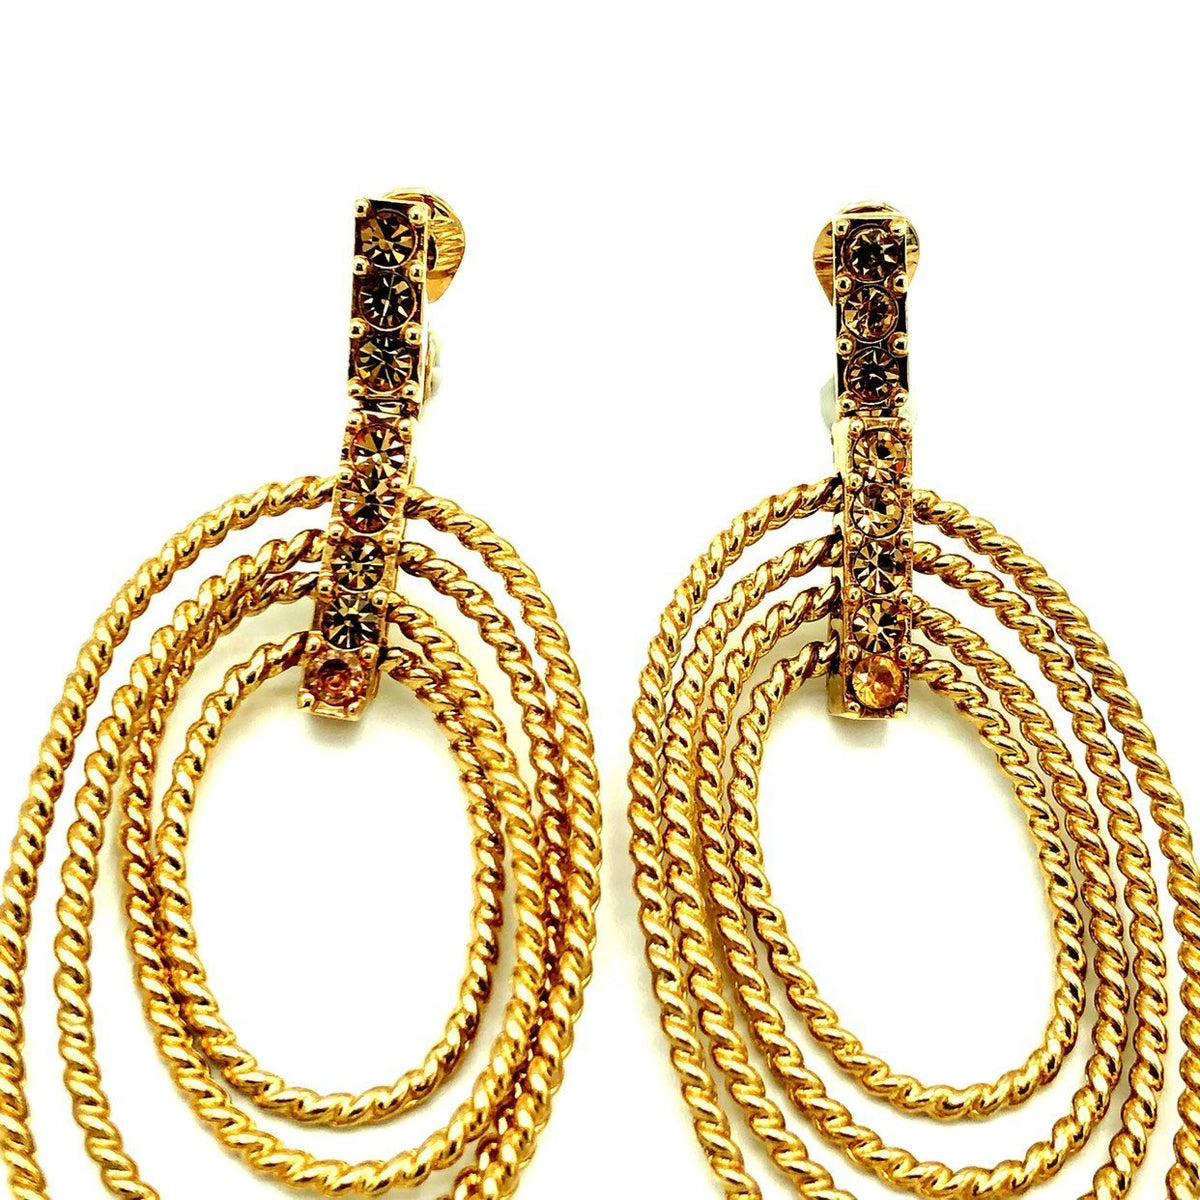 Monet Gold Circle Hoop Vintage Clip-on Earrings - 24 Wishes Vintage Jewelry